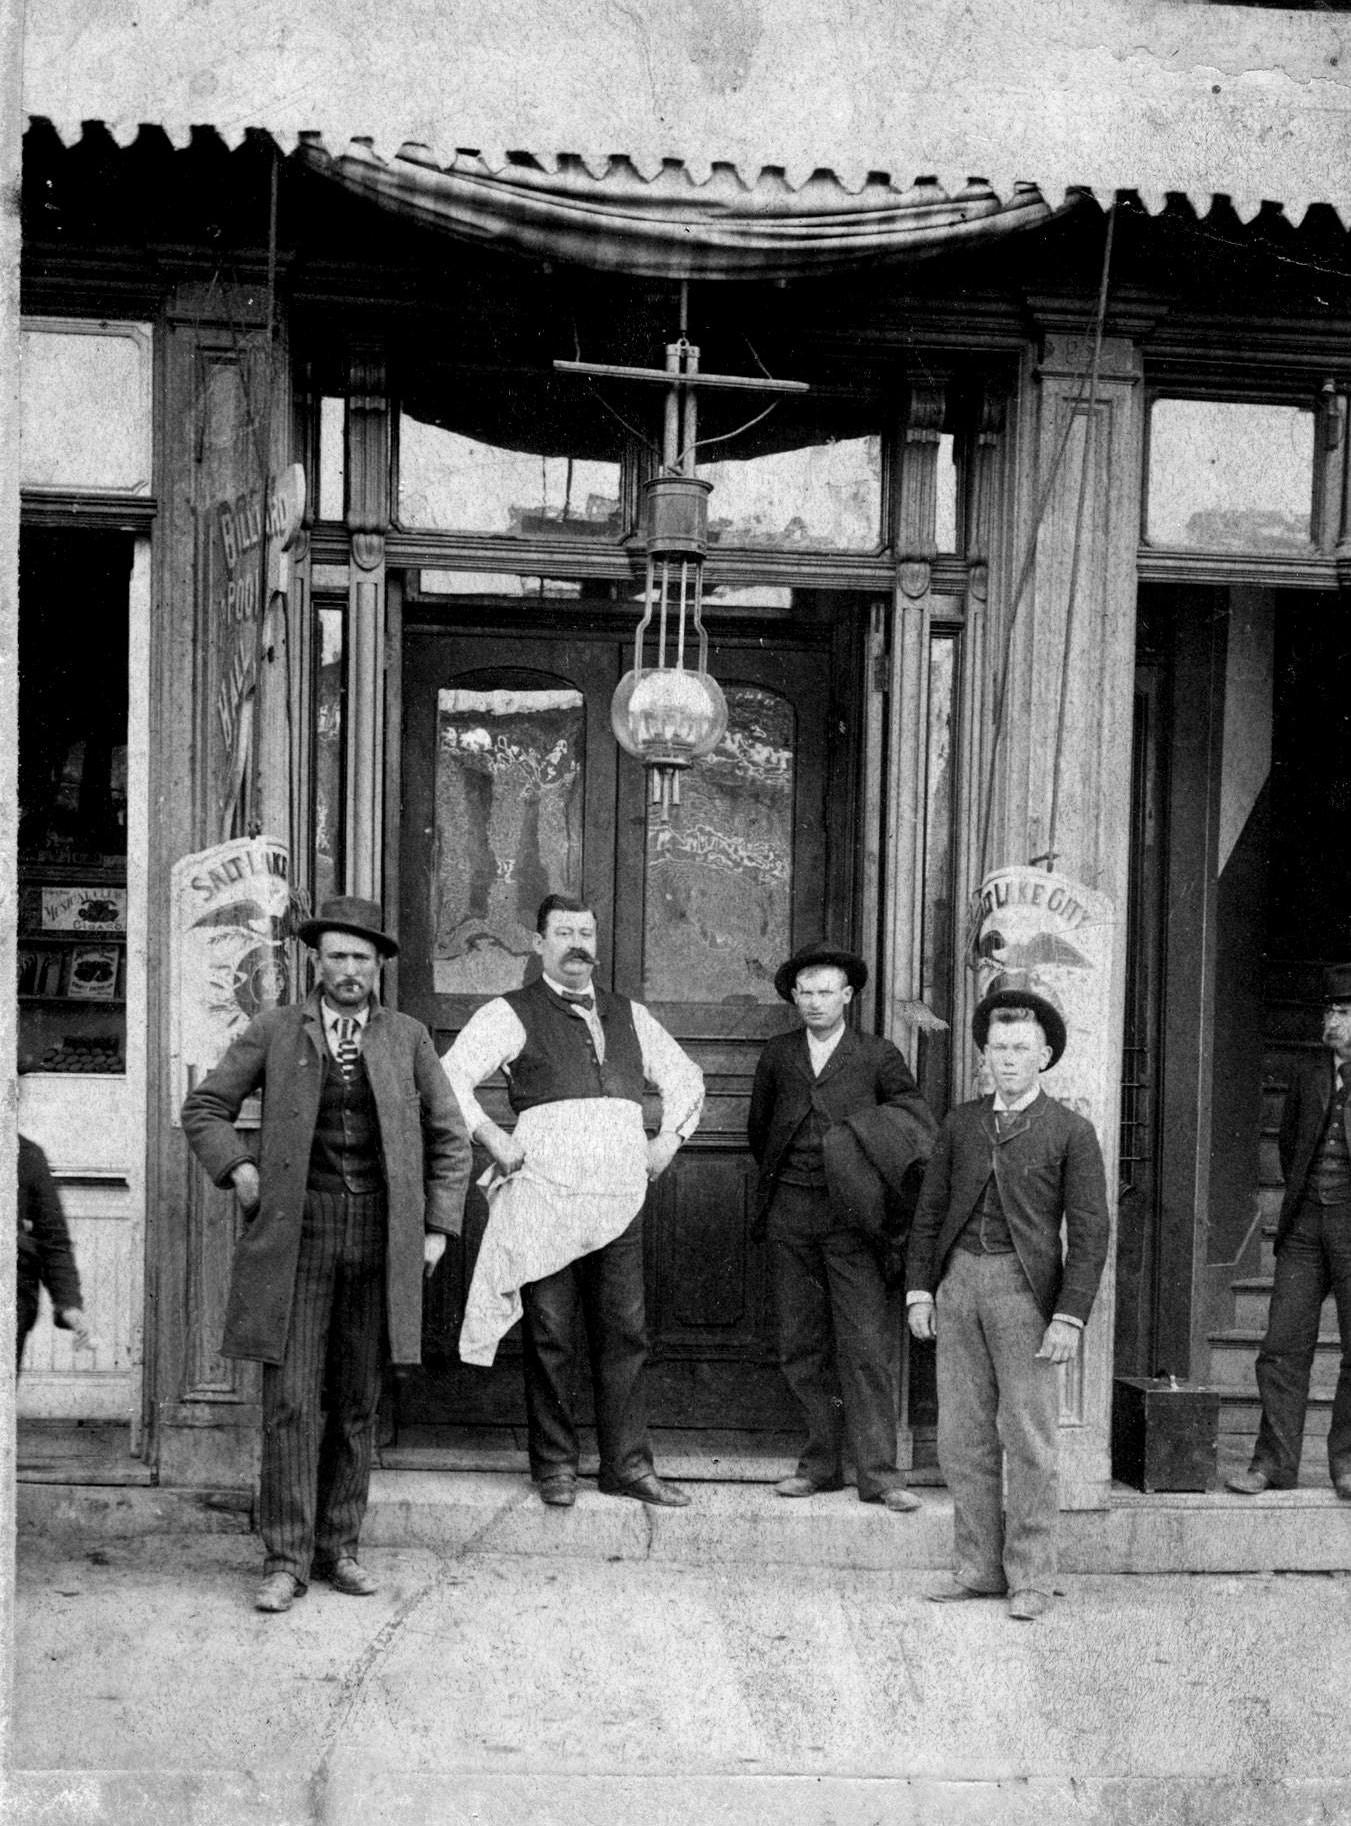 The Fountain beer hall, its proprietor, and some customers, 1890s.jpg